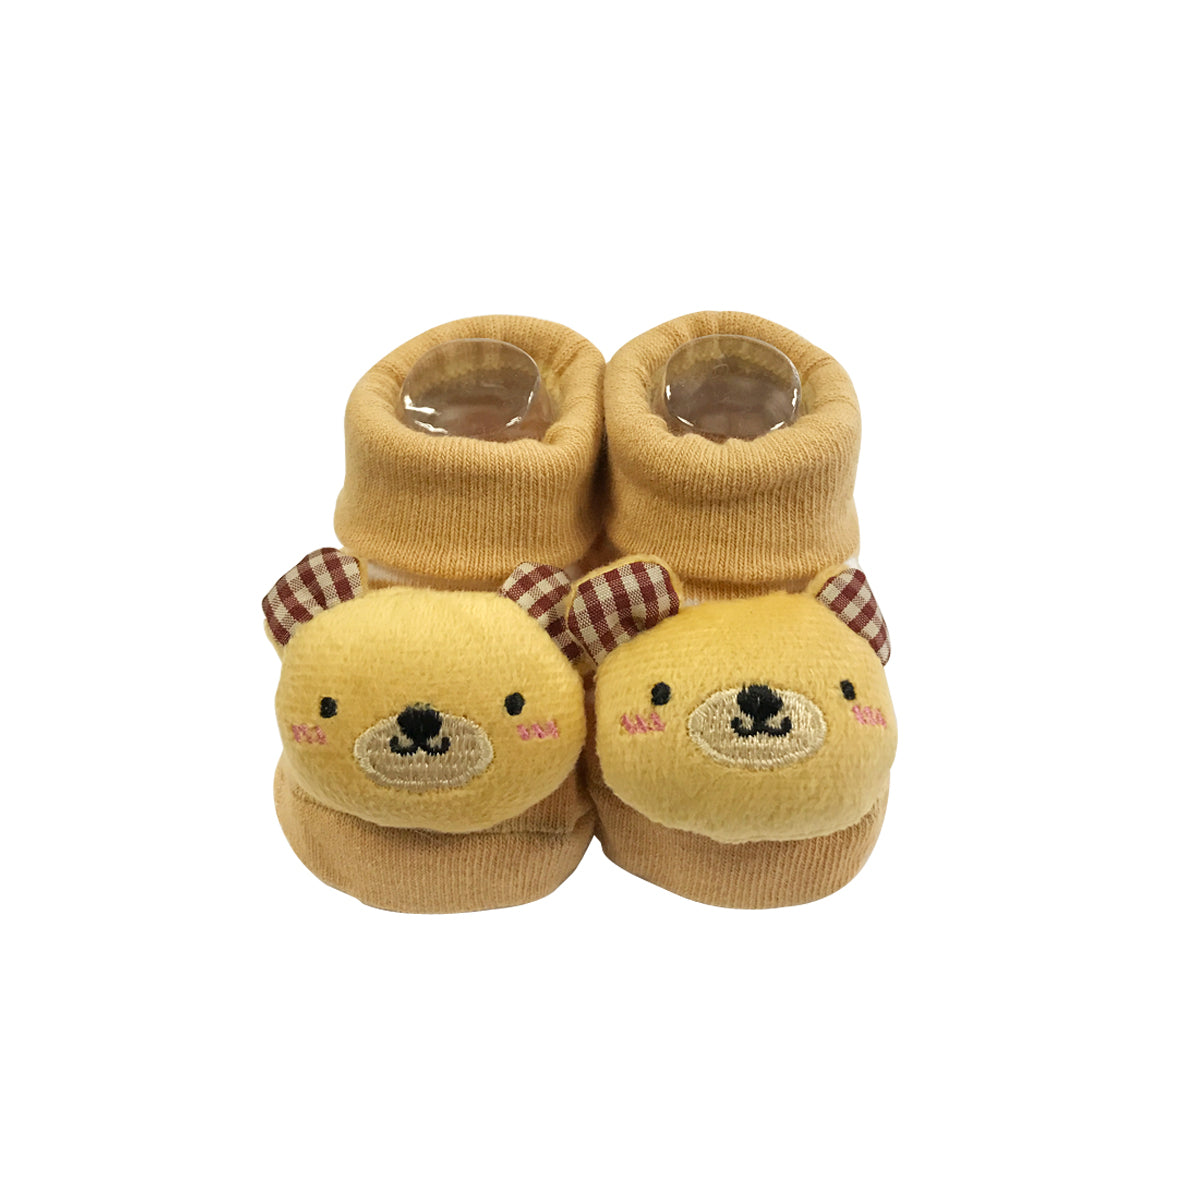 Wrapables Cute 3D Cartoon Anti-Skid Baby Booties Sock Slipper Shoes (Set of 6)